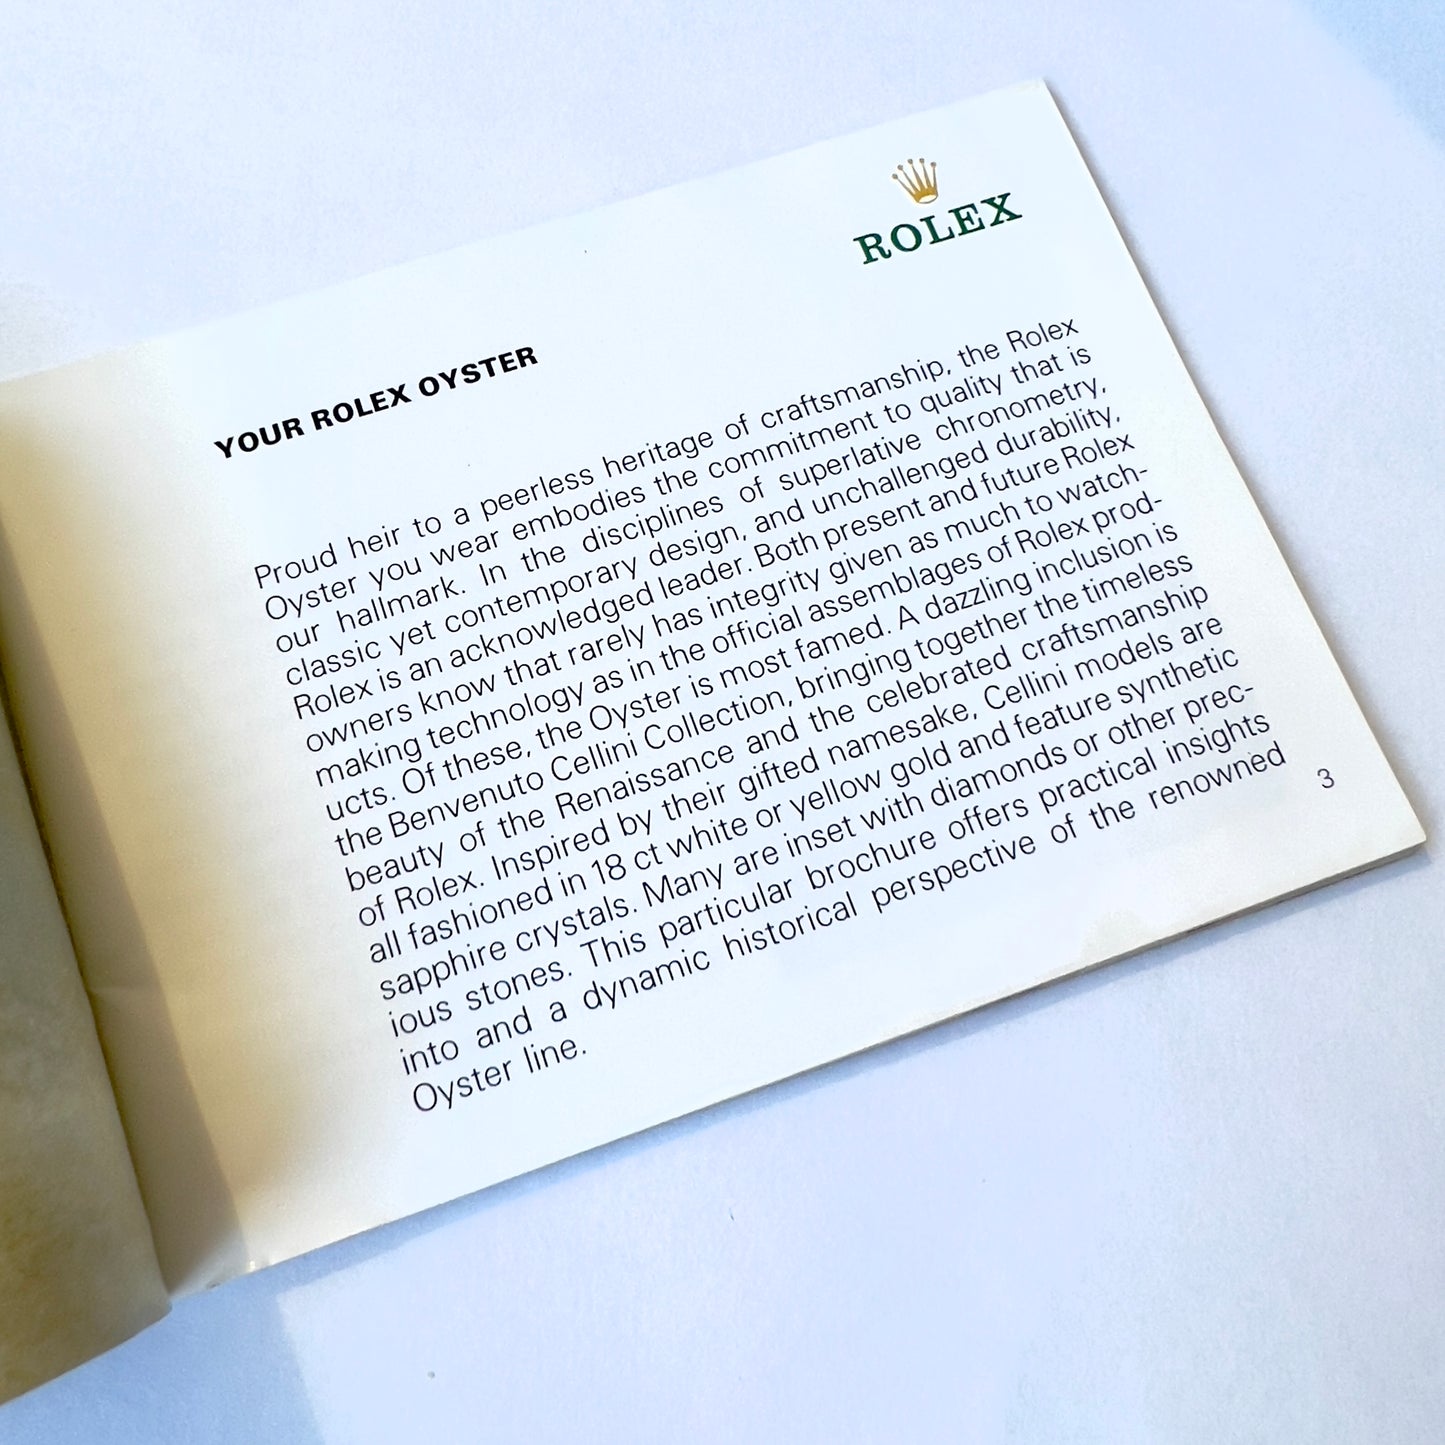 ROLEX Oyster 1995 Booklet/Pamphlet English